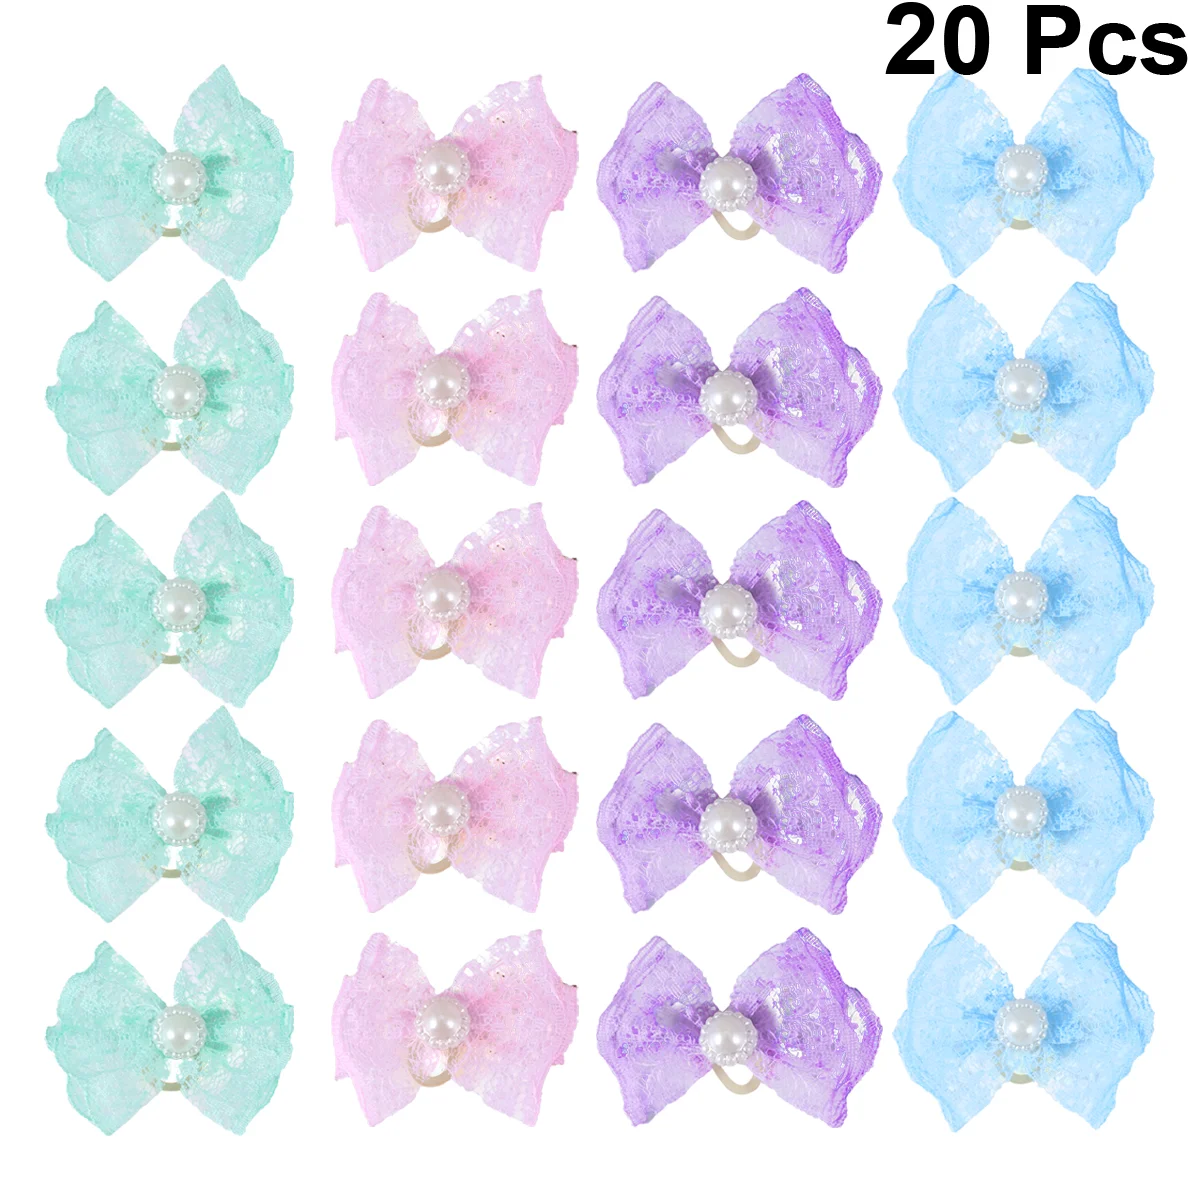 

20pcs Puppy Hair Bows Small Bowknot Hair Tie Rubber Hair Band Hair Accessories Bow Grooming Products for Cat Puppy Mixed Color